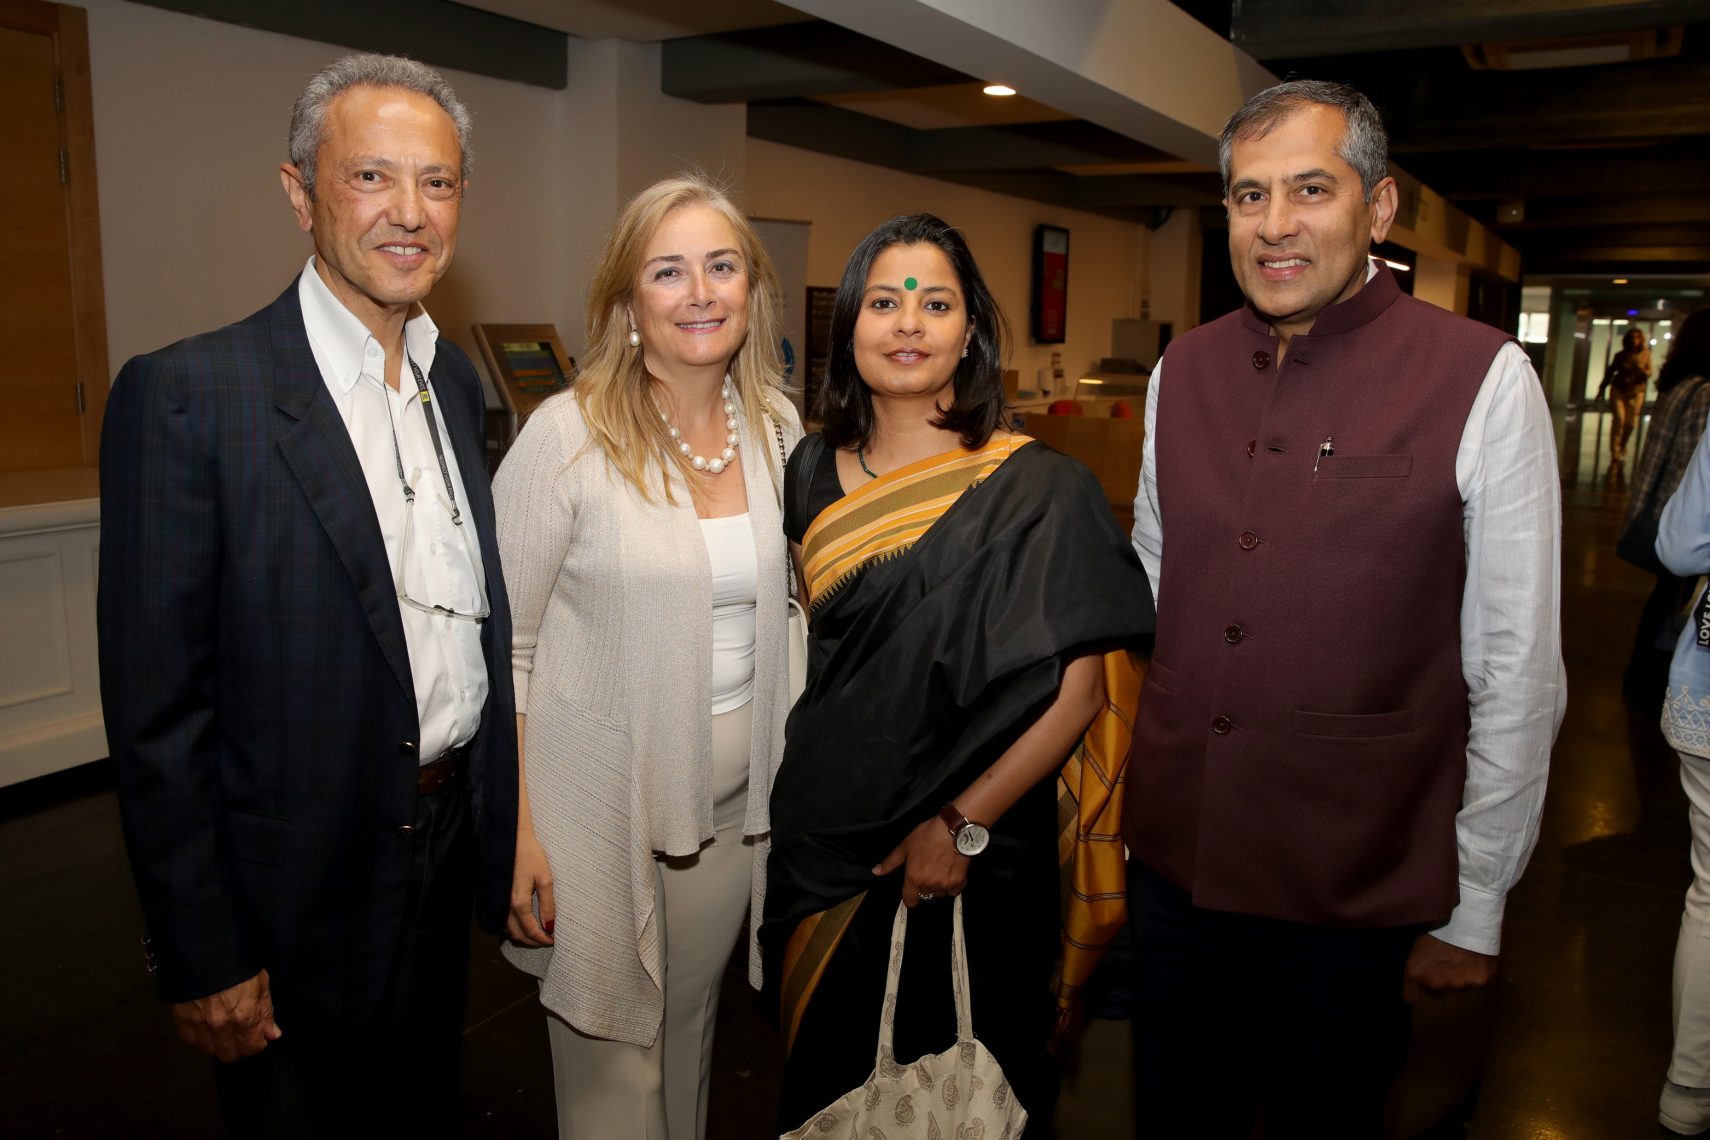 The ambassador of India and his wife, with Charles and Ariella Zeloof